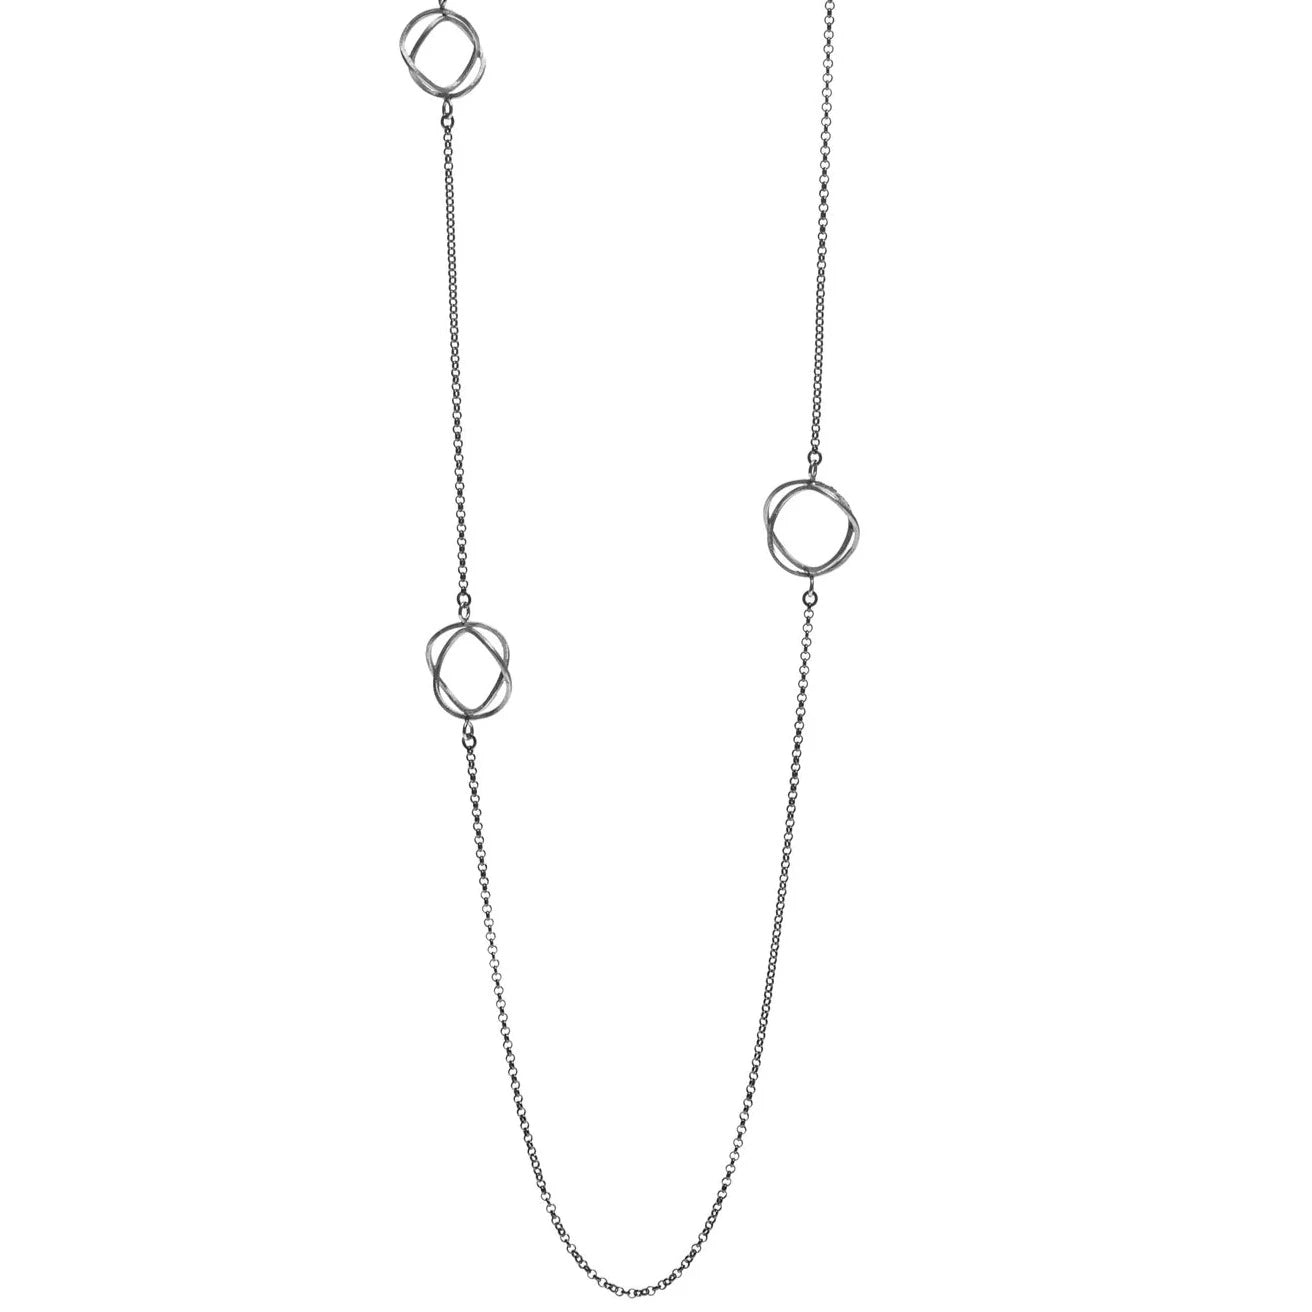 Mysterium Collection Sterling Silver and Oxidized Sterling Silver Double Wavy Stations Necklace